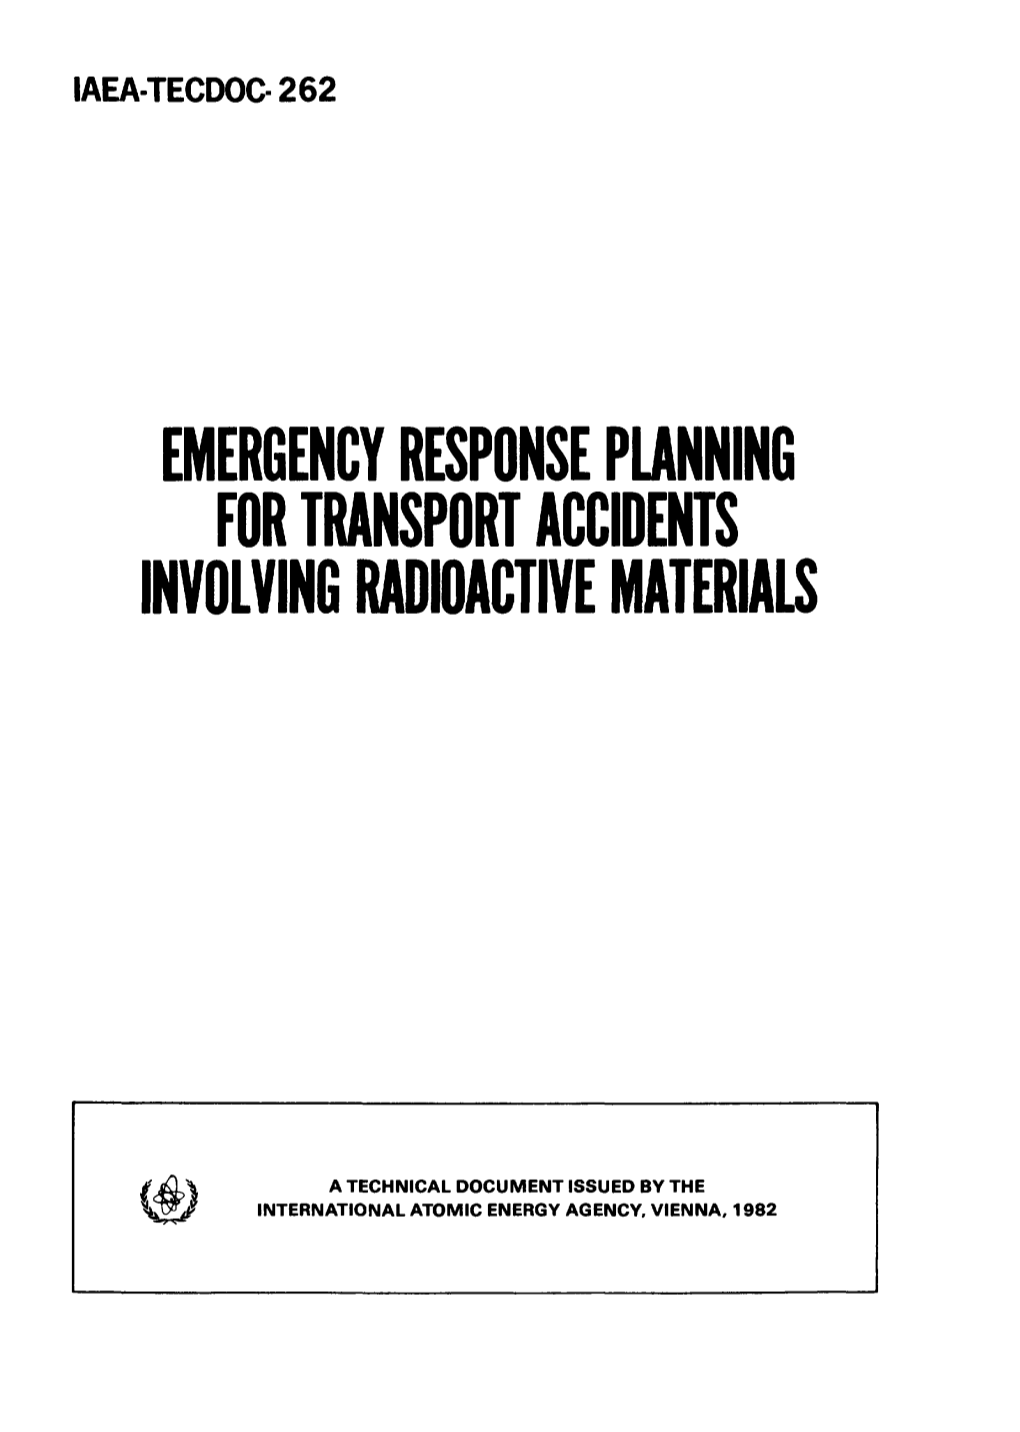 Emergency Response Punning for Transport Accidents Mvolving Radioactive Materials